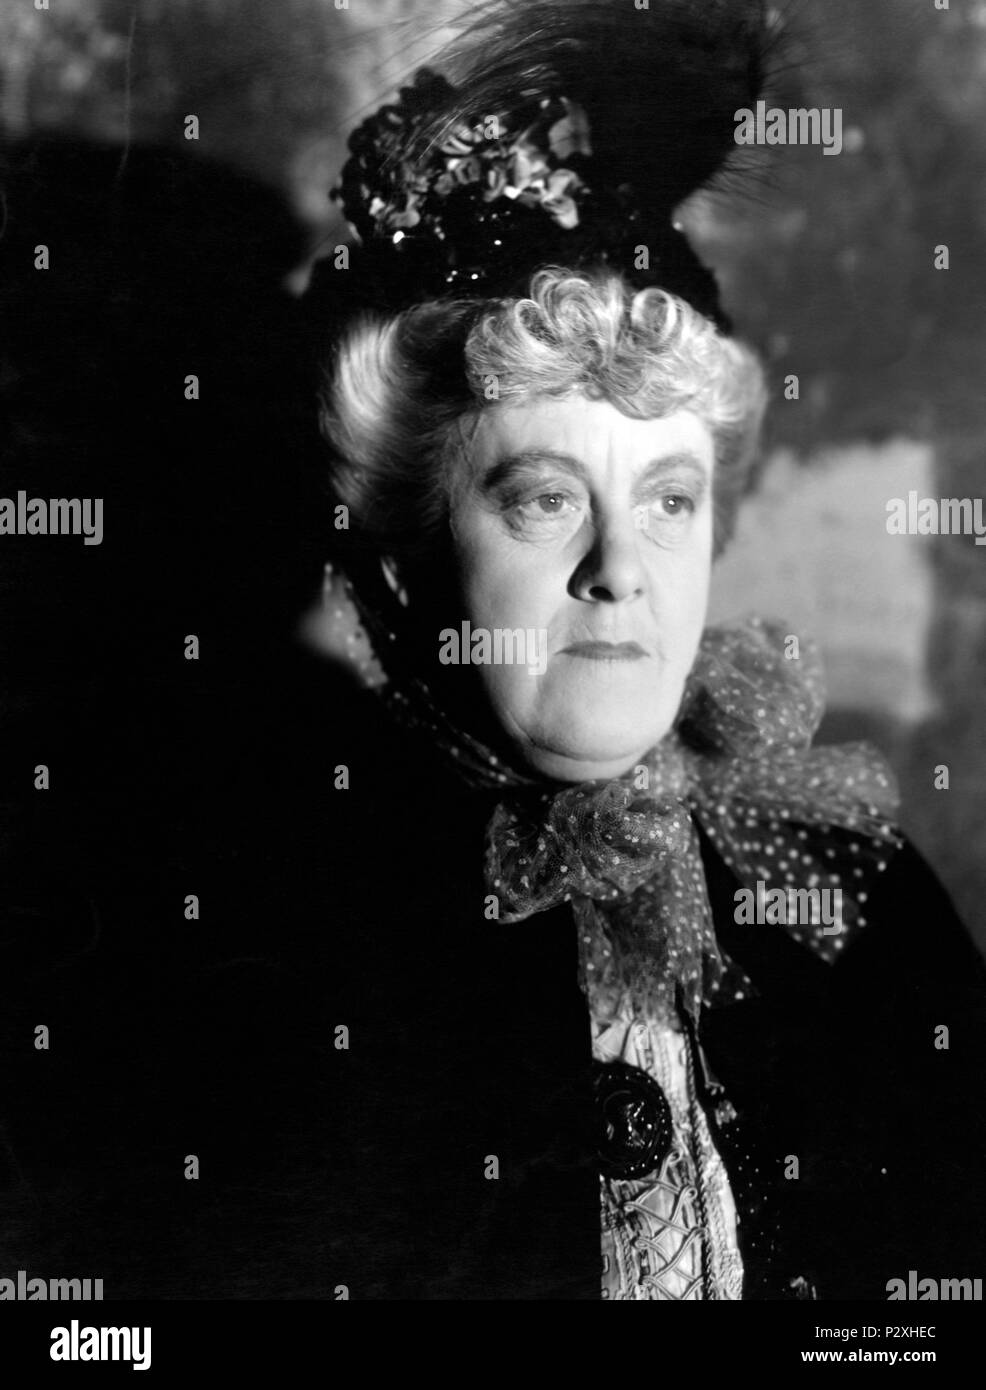 Original Film Title: MEET ME AT DAWN.  English Title: MEET ME AT DAWN.  Film Director: THORNTON FREELAND; PETER CRESWELL.  Year: 1947.  Stars: MARGARET RUTHERFORD. Credit: MARCEL HELLMAN PRODUCTIONS / Album Stock Photo